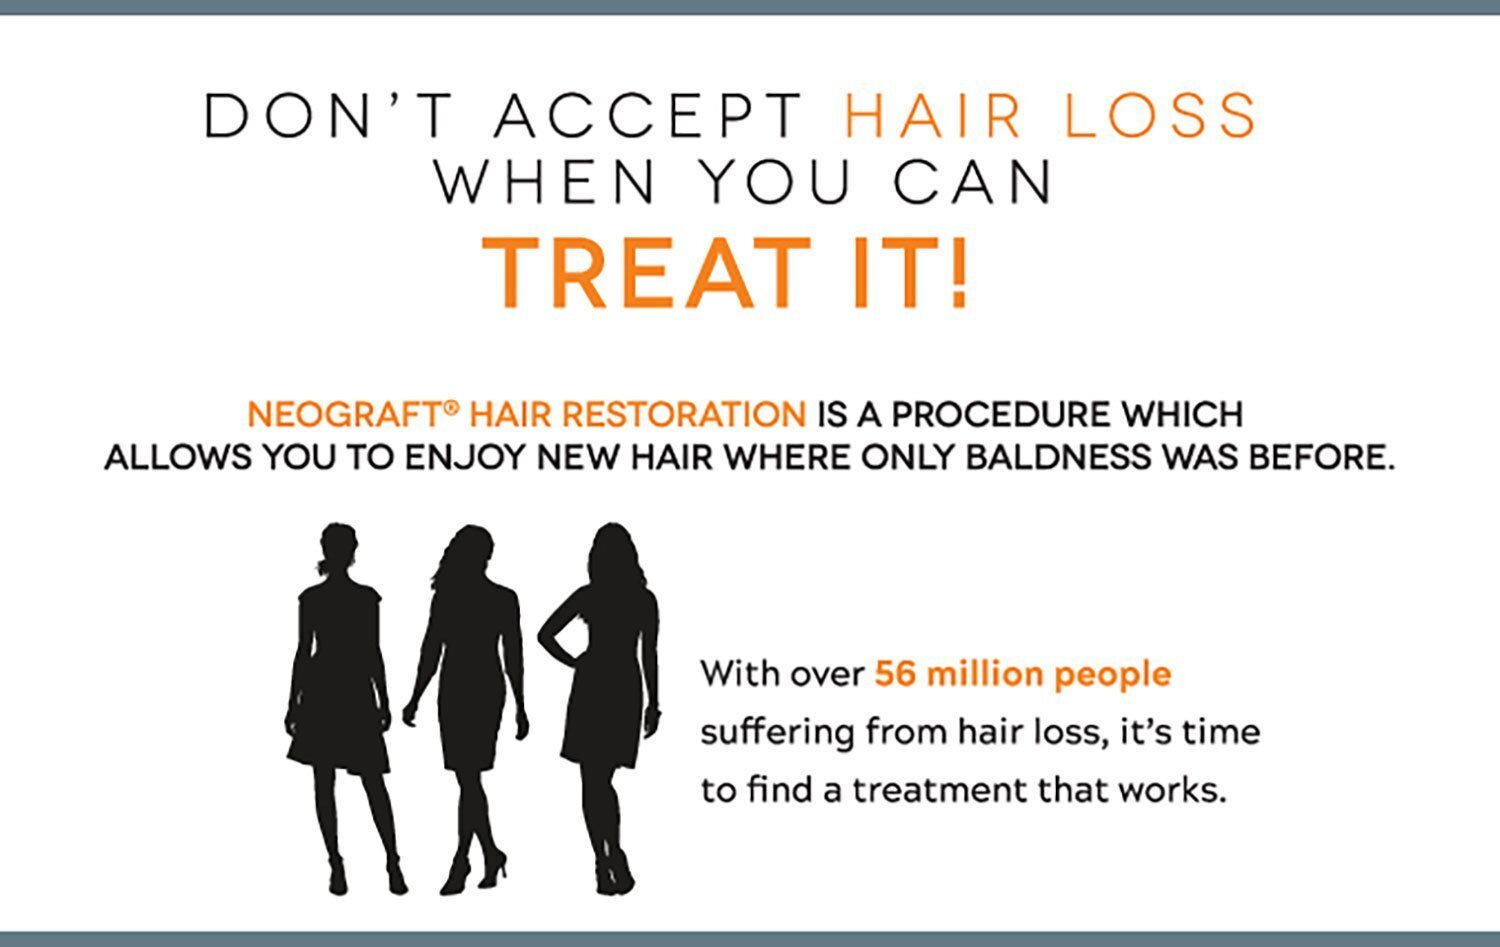 NeoGraft for Women Grand Rapids - Don't Accept Hair Loss When You Can Treat It! NeoGraft Hair Restoration is a procedure which allows you to enjoy new hair where only baldness was before. With over 56 million people suffering from hair loss, it's time to find a treatment that works.